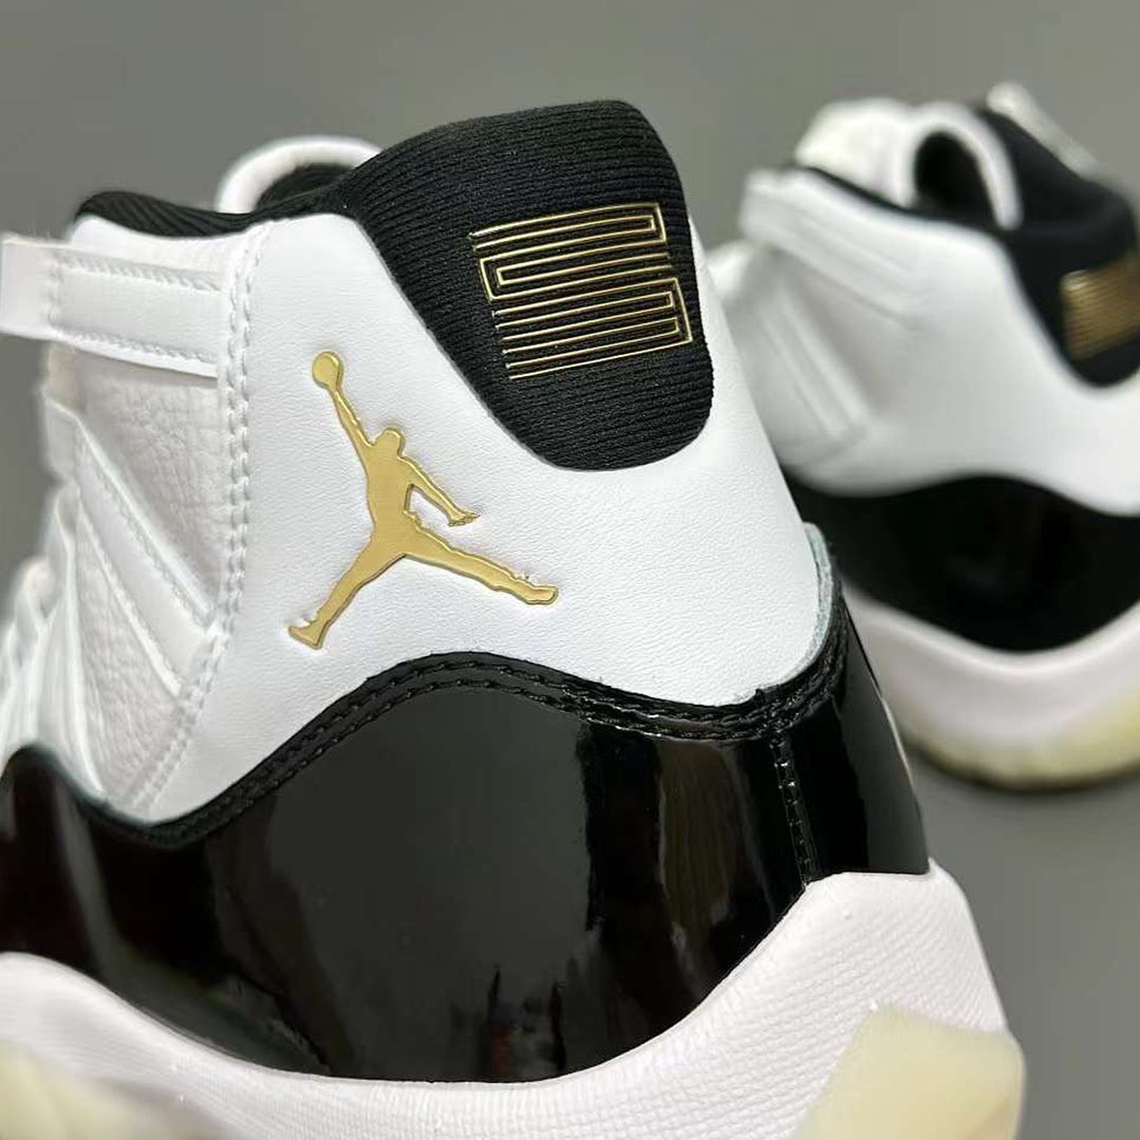 Homage to 2006: Air Jordan 11 Gratitude is inspired by the Air